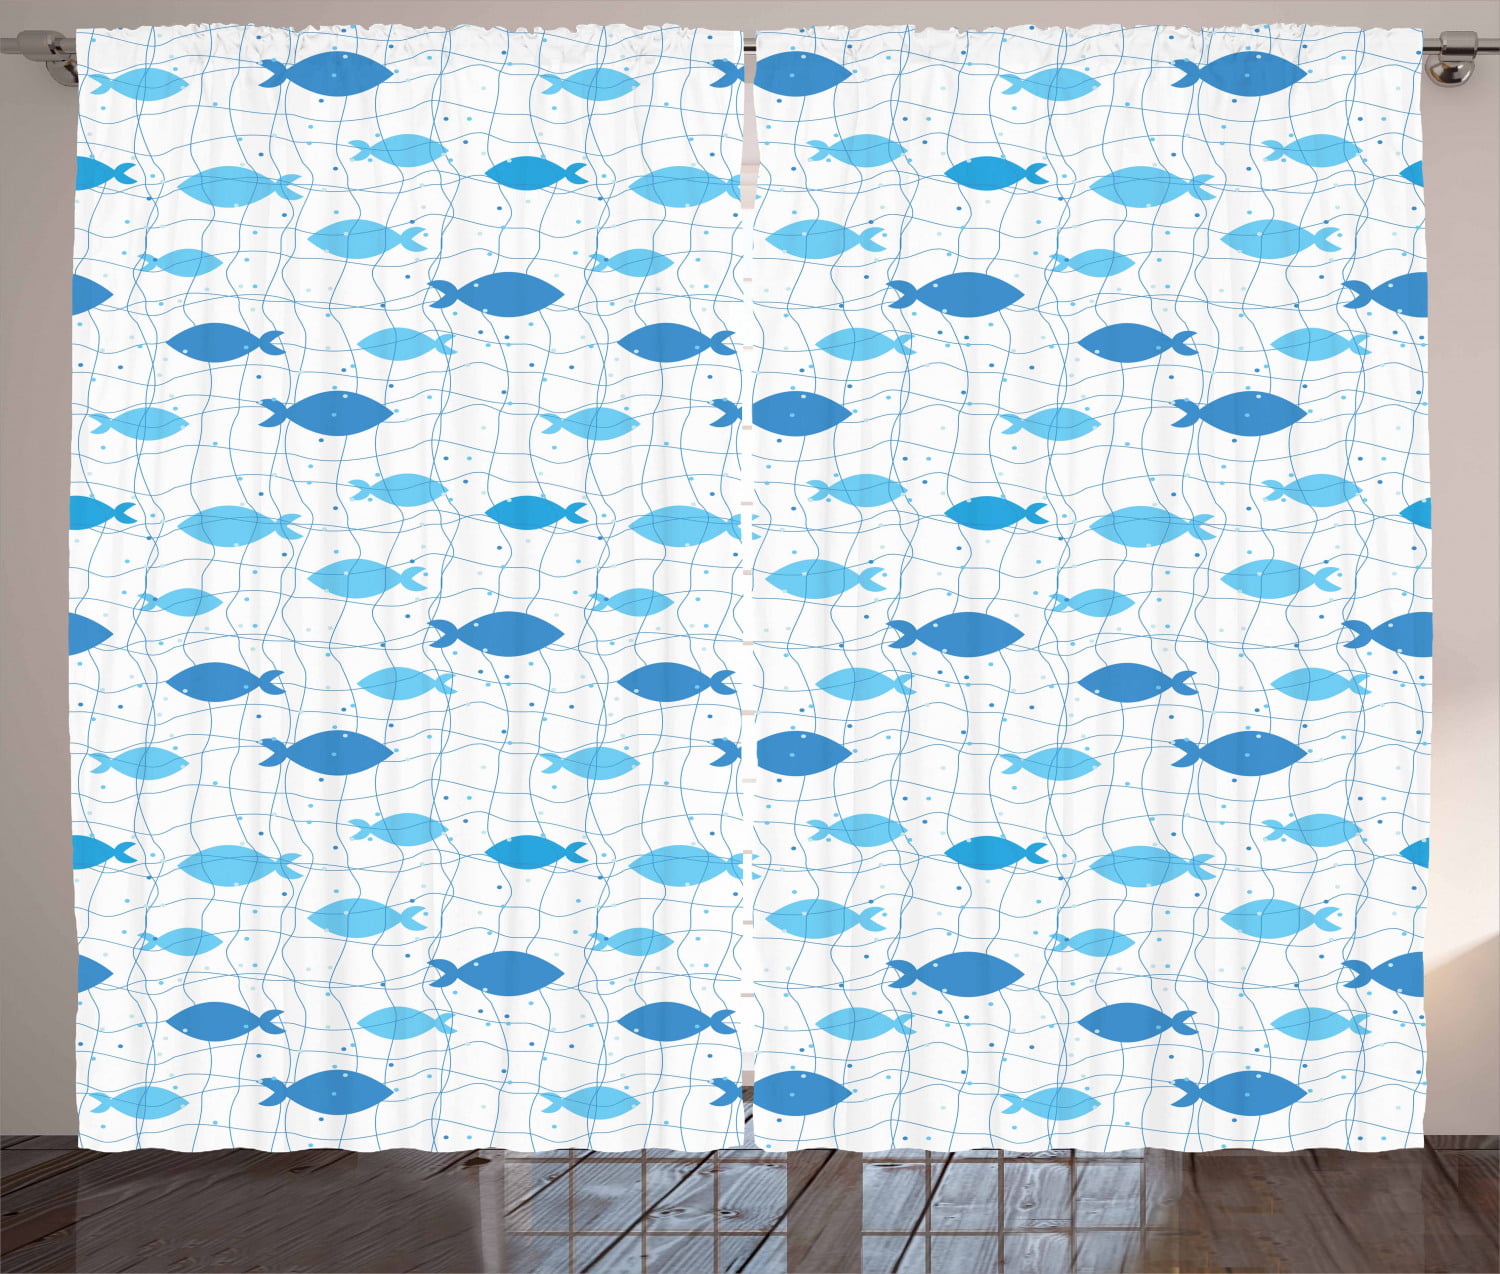 Fish Curtains 2 Panels Set, Fish Net with Polka Dots Abstract Animal  Silhouettes Nature Inspired Image, Window Drapes for Living Room Bedroom,  108W X 108L Inches, Blue Pale Blue White, by Ambesonne -